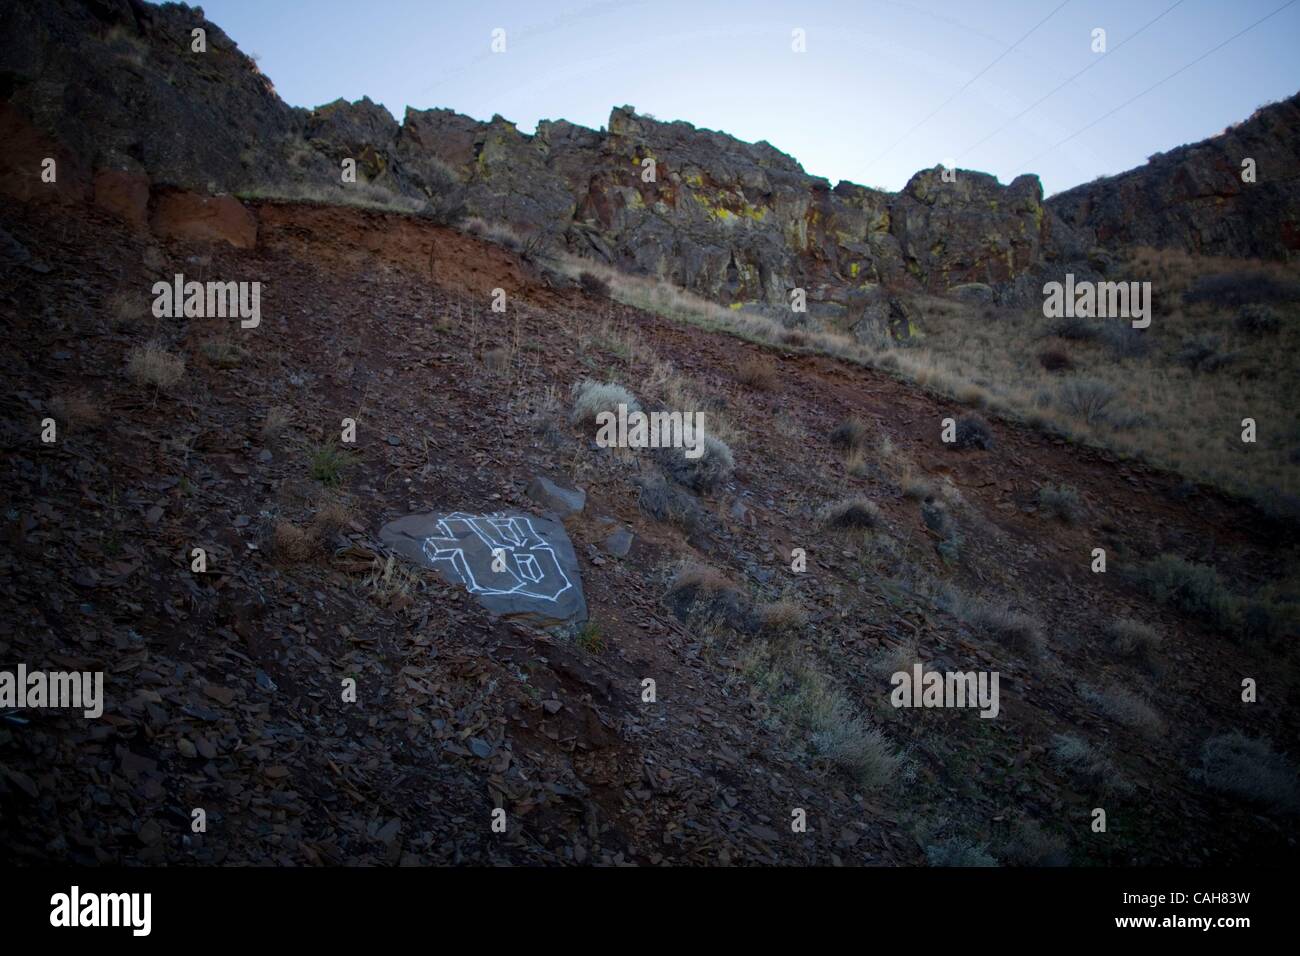 Nov. 02, 2010 - Vantage, Washington, U.S. - The number 18 is spray-painted onto a rock near Vantage. 18 represents 18th Street gang, a rival gang to the Marijuanos and the ones responsible for a recent slaying of a Marijuanos gang member. (Credit Image: &#169; Mike Kane/ZUMAPRESS.com) Stock Photo